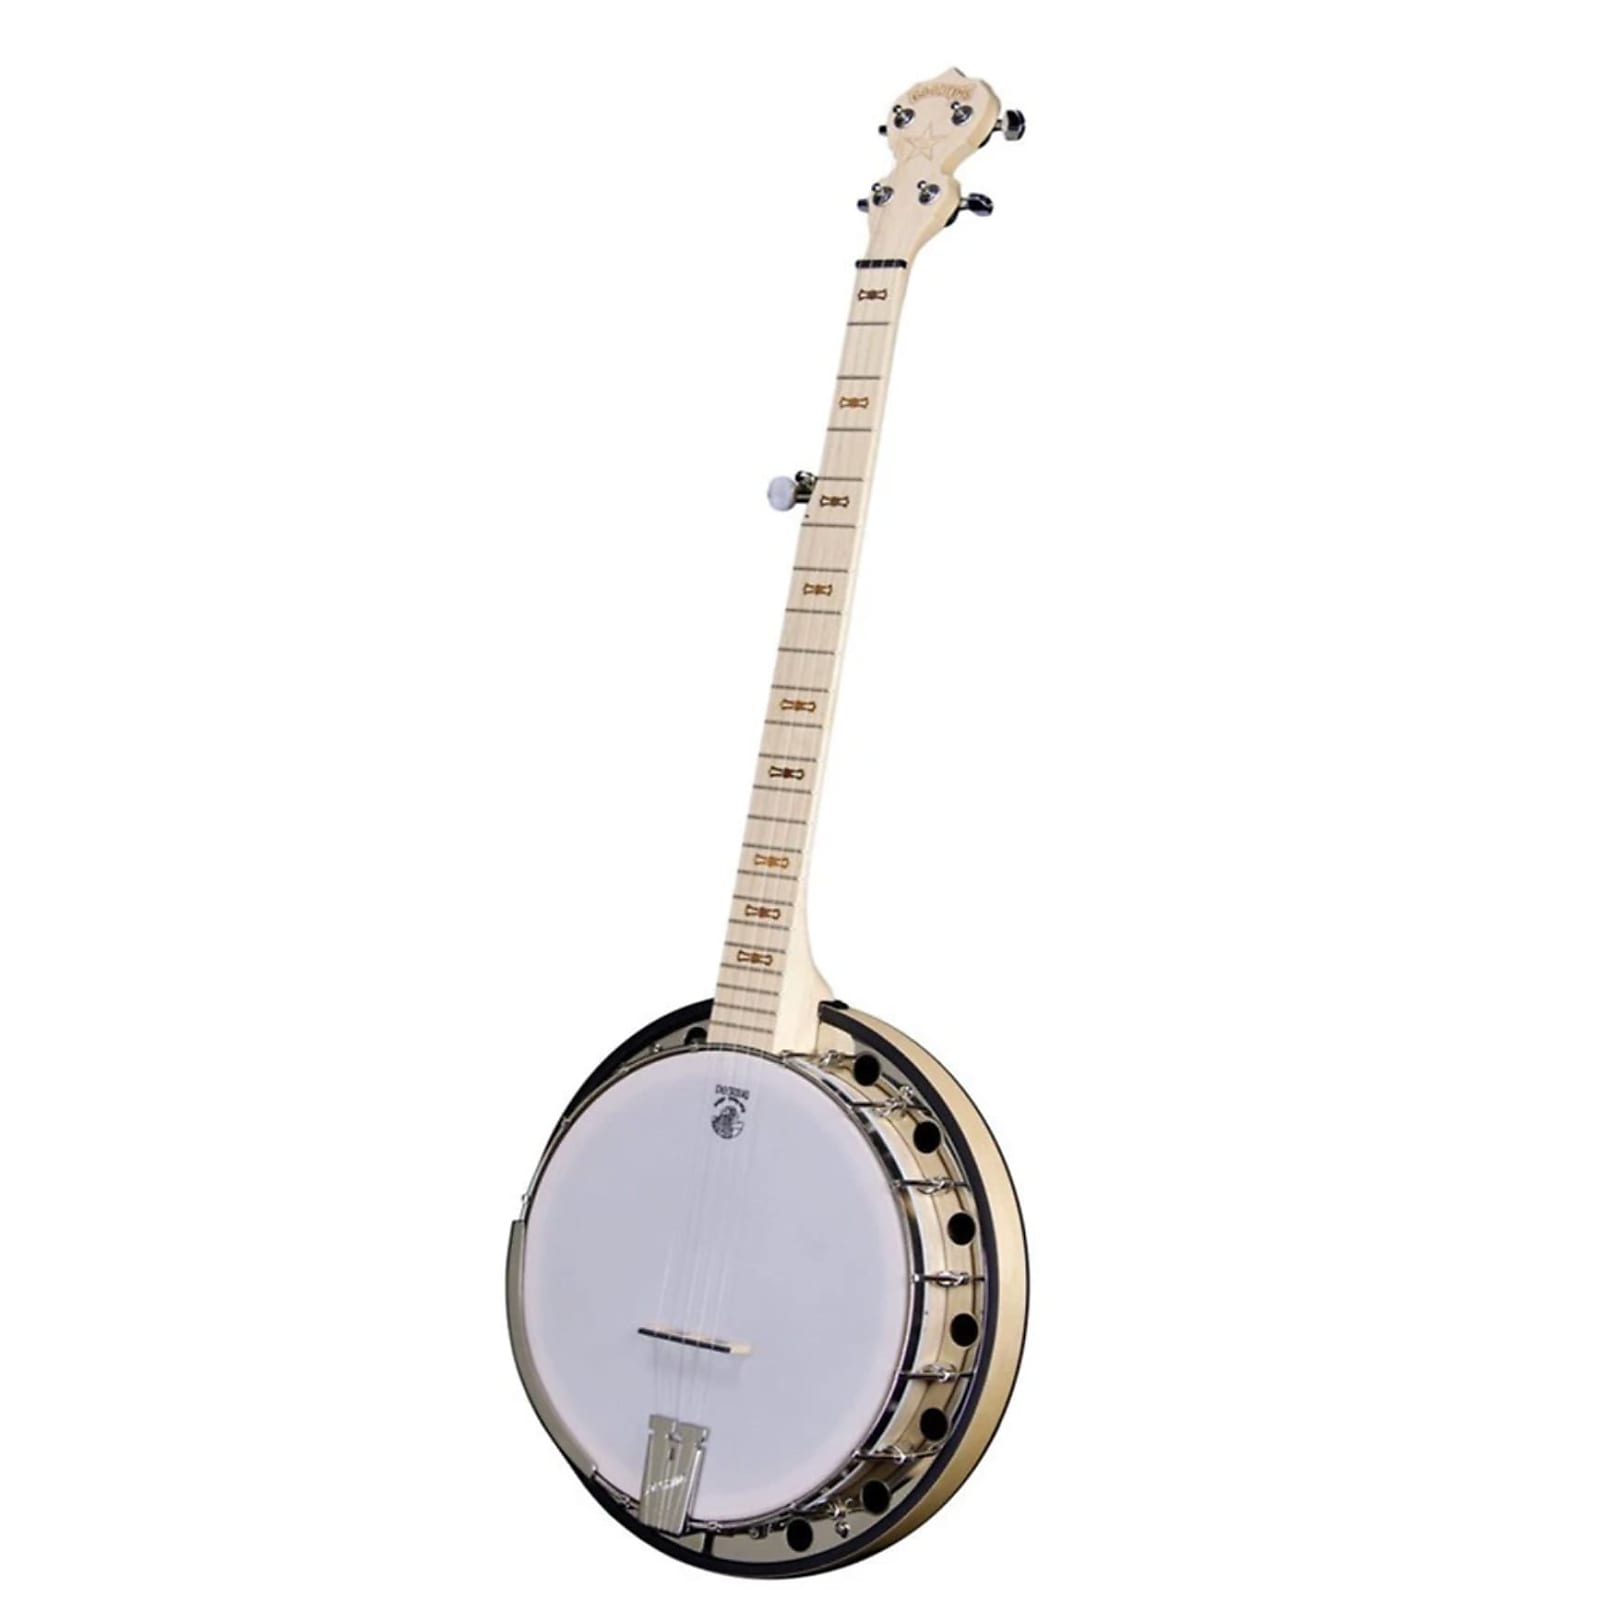 Deering Banjos Goodtime Series Two 5-String with Resonator